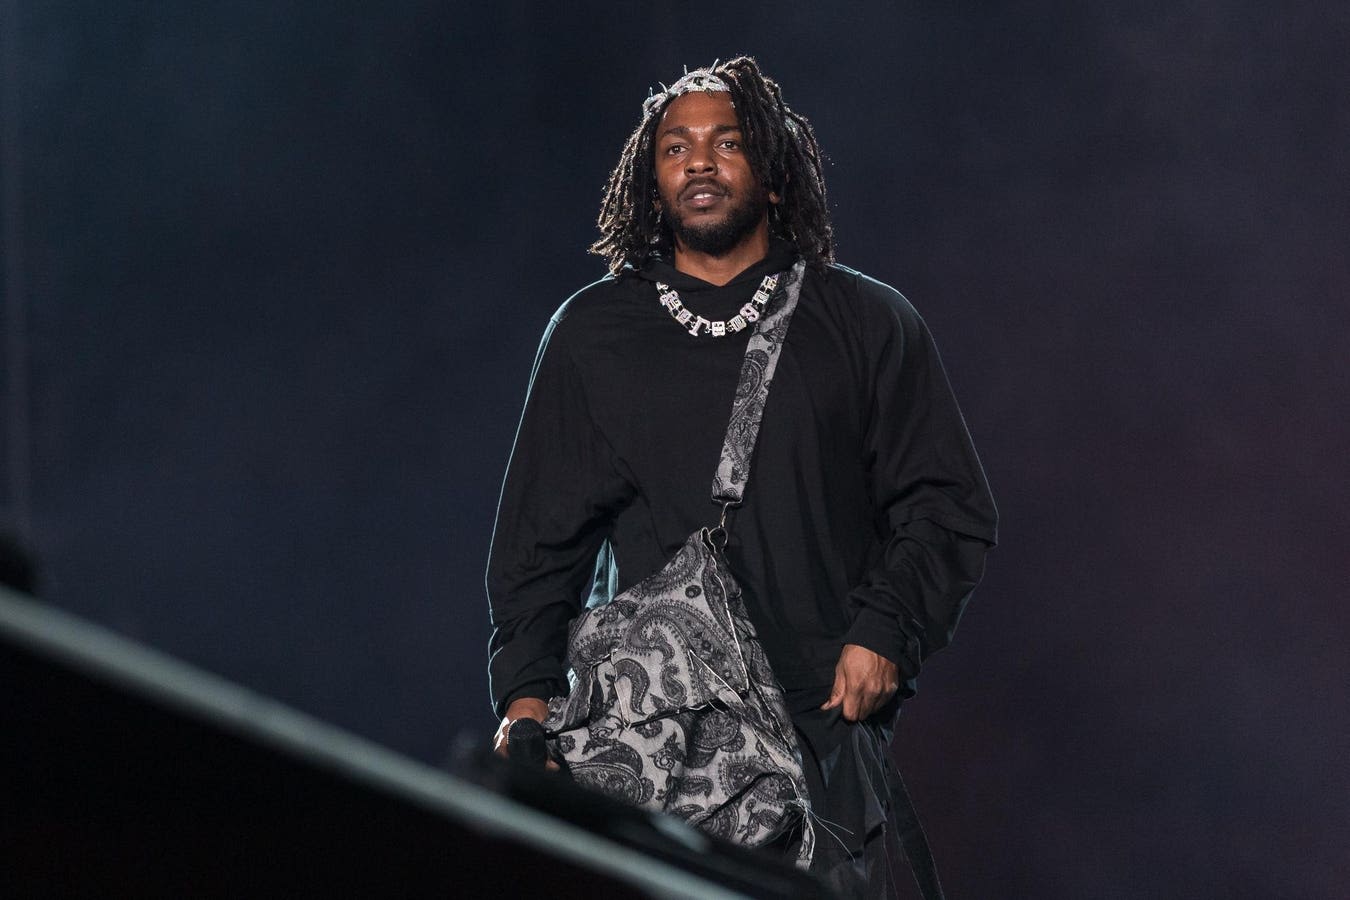 Kendrick Lamar Claims 3 Of The Top 5 Top Songs On iTunes–And They’re All Drake Diss Tracks